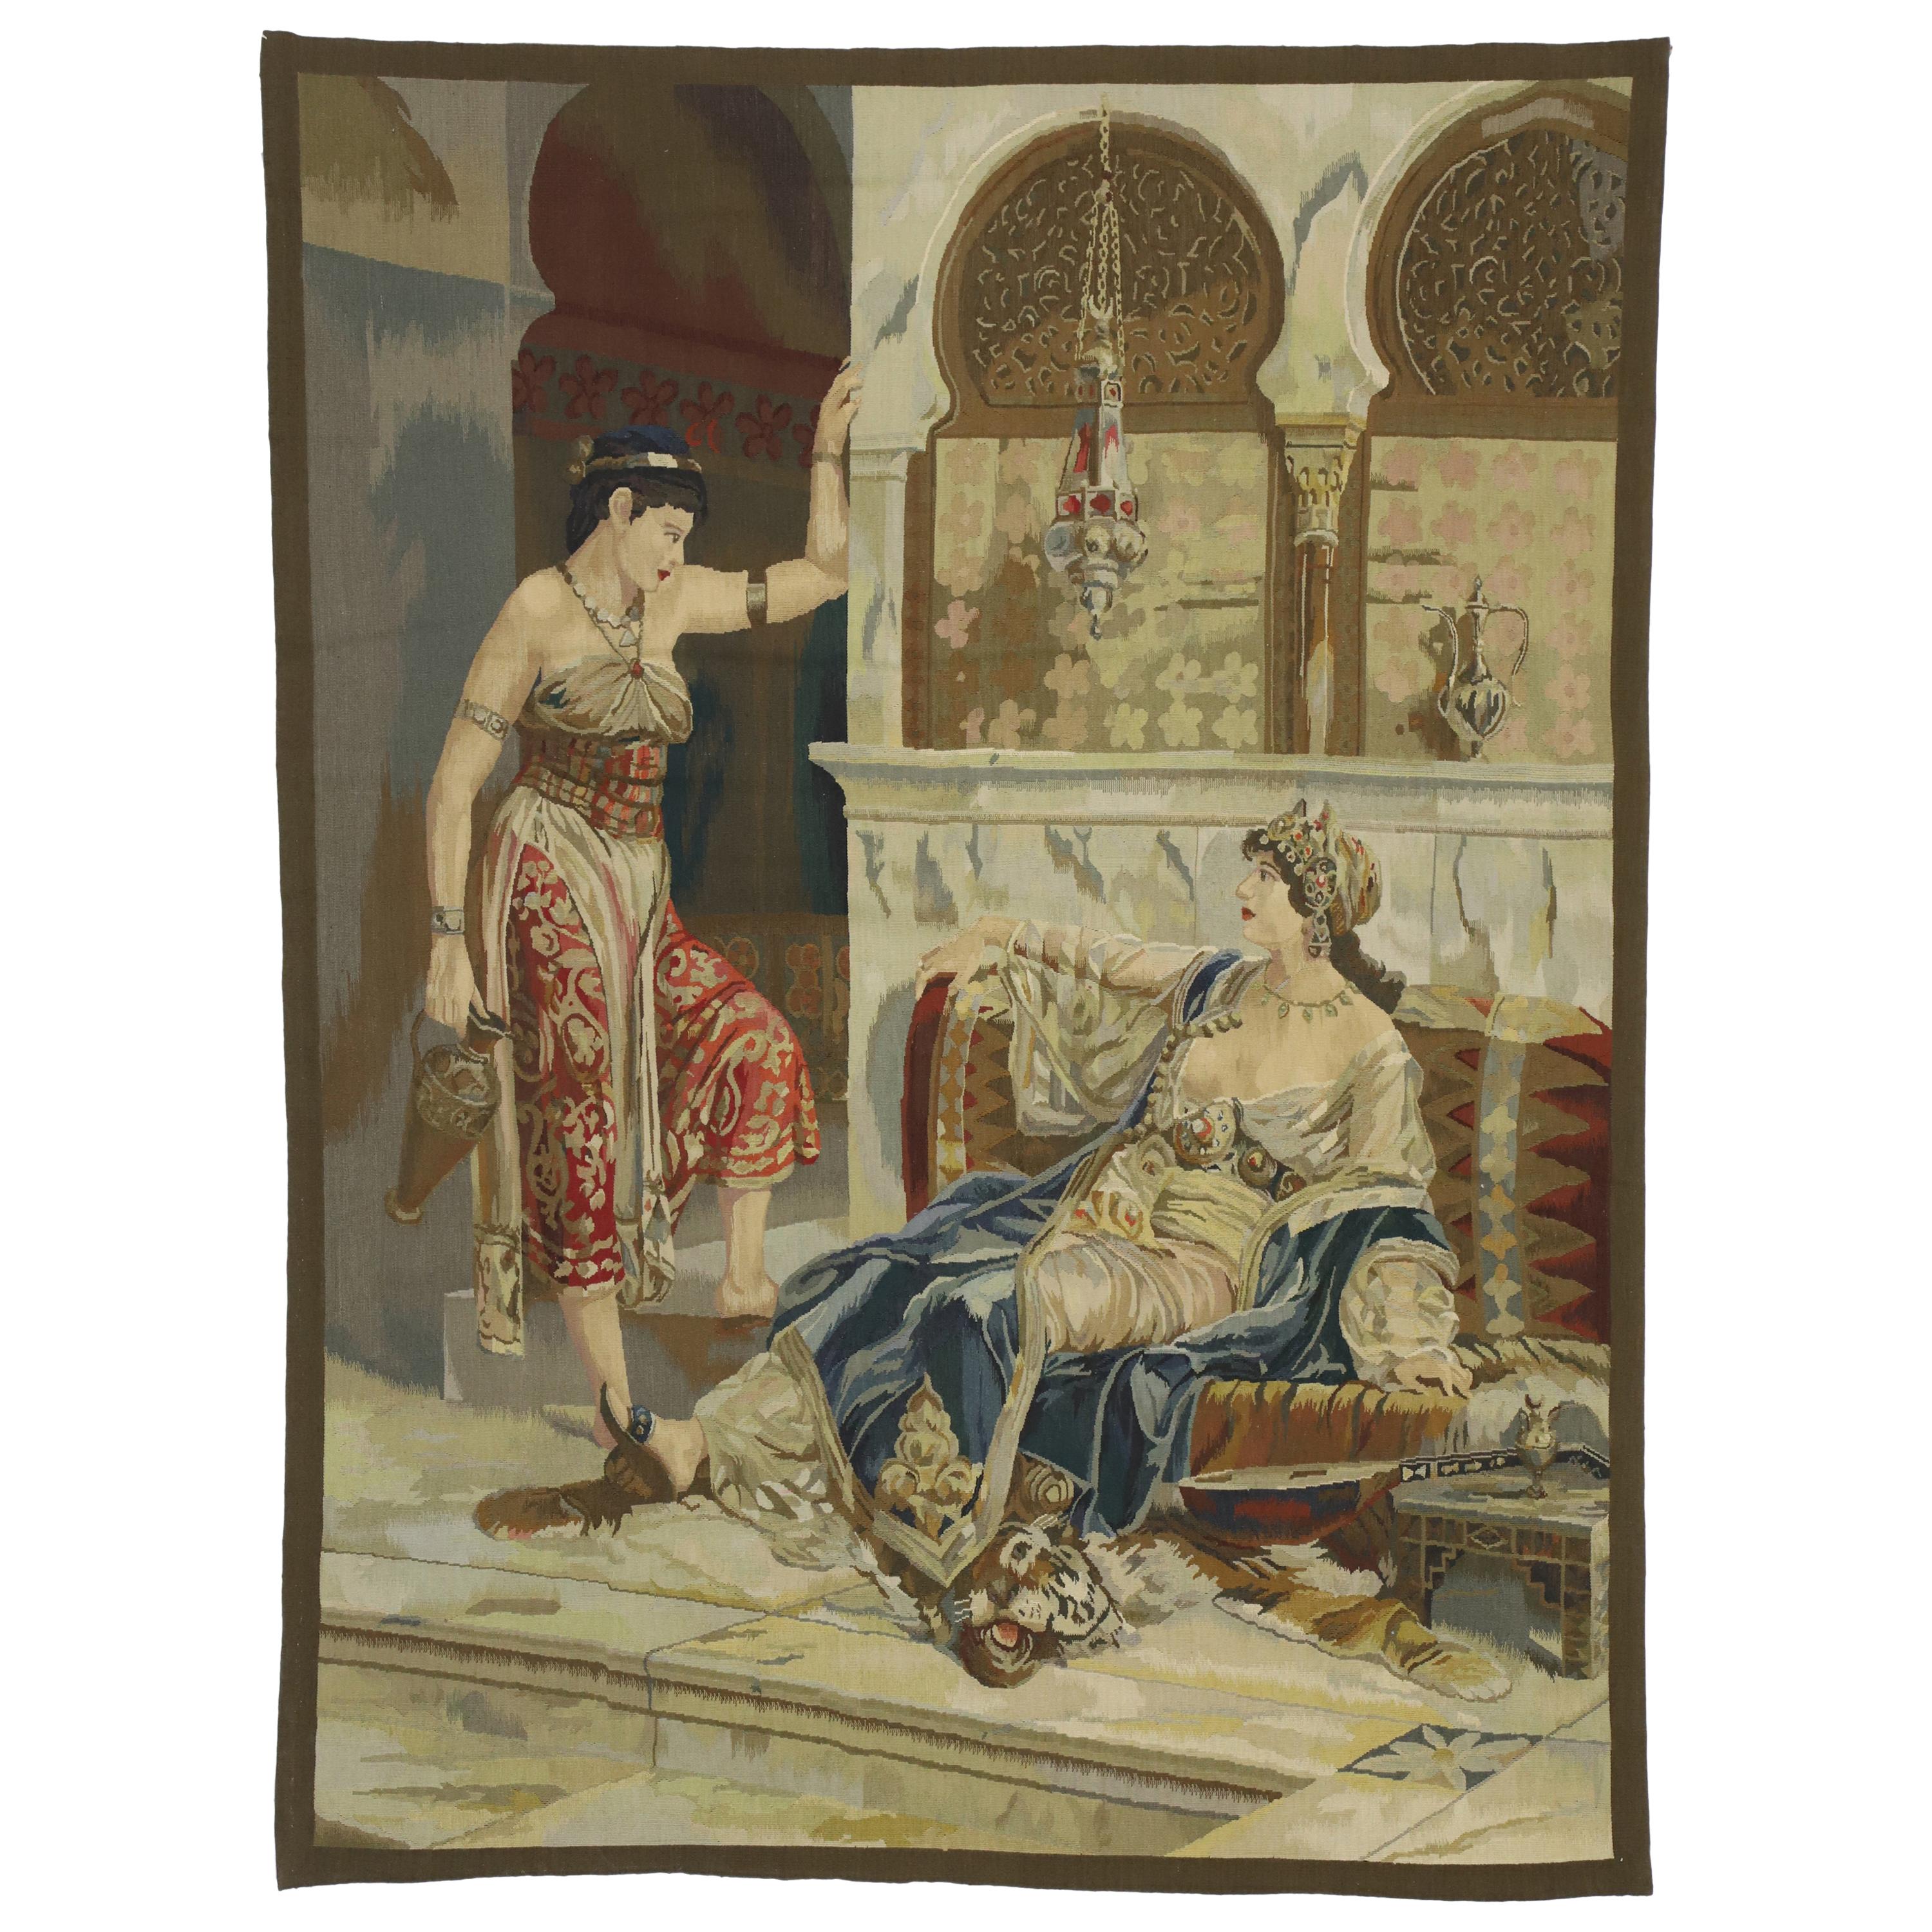 Imperial Harem Odalisque Tapestry with Ottoman Empire Style, Wall Hanging